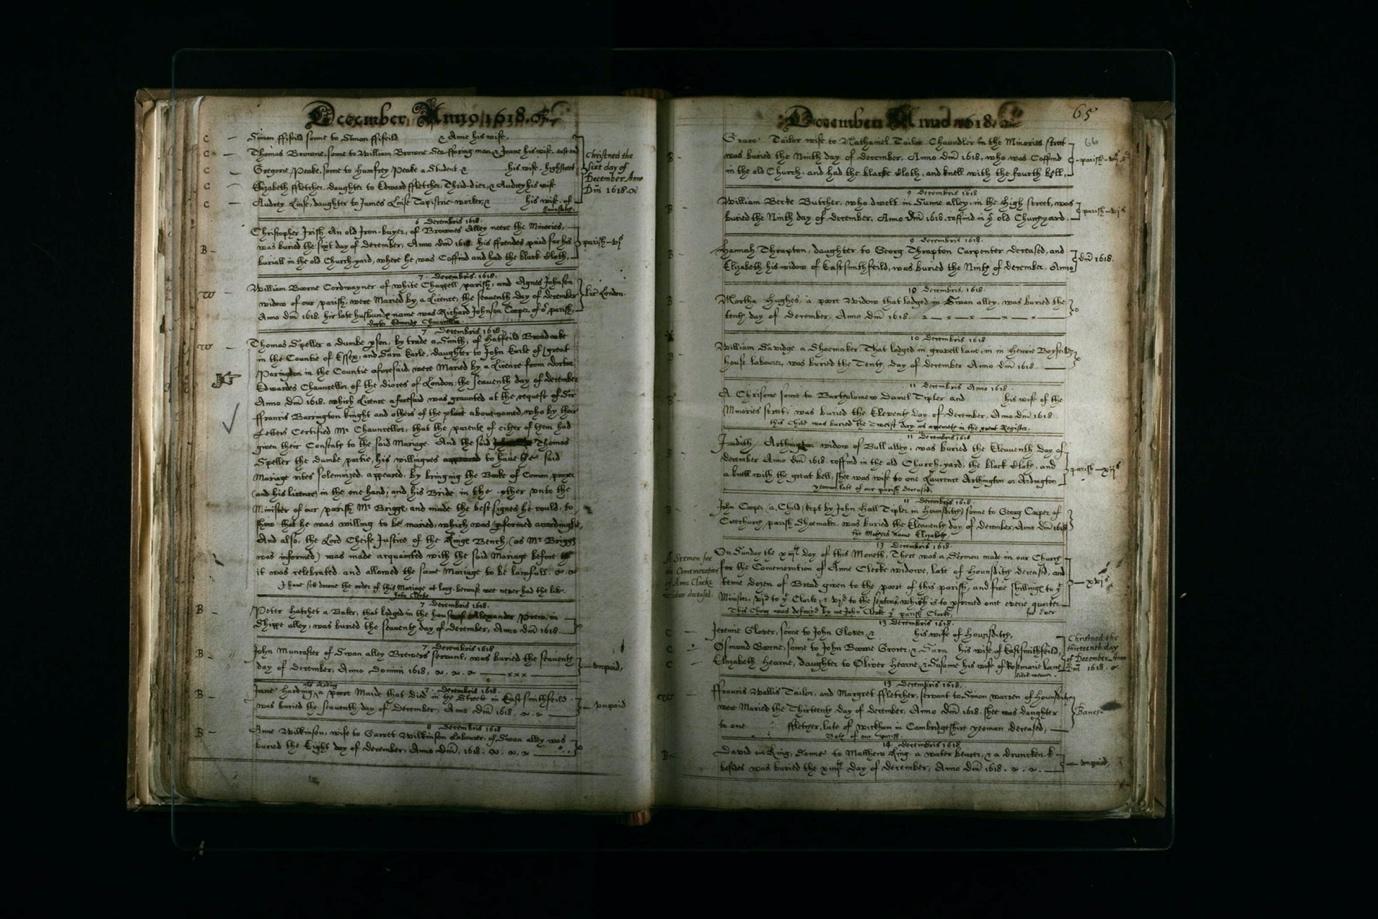 An old book with handwritten entries in secretary hand used in the 16th and 17th centuries.